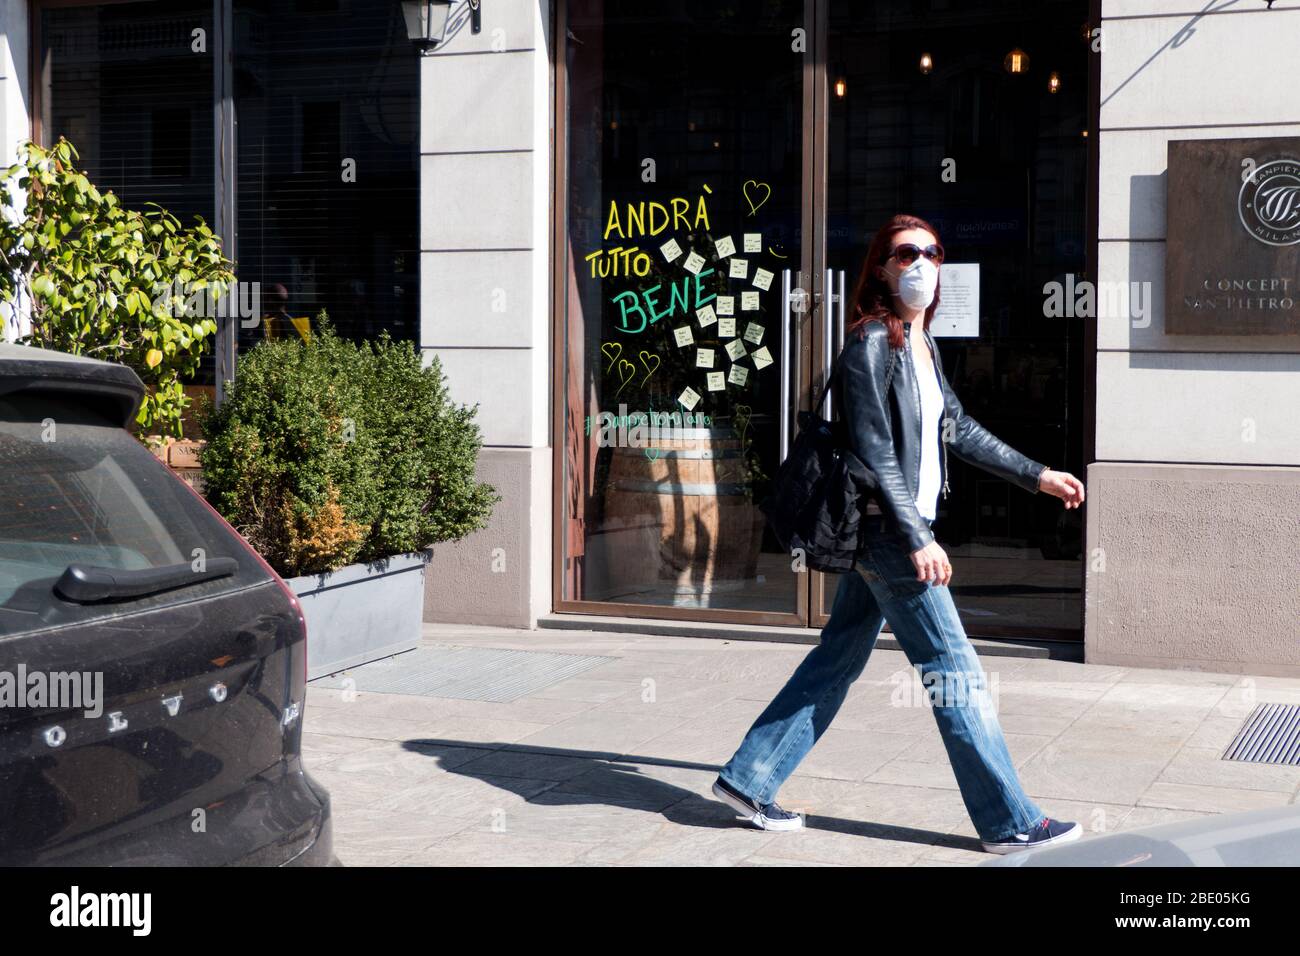 Woman wearing protective face mask and walking on the street in Milan, Italy during COVID-19 pandemic. Andra' tutto bene - Everything will be fine Stock Photo